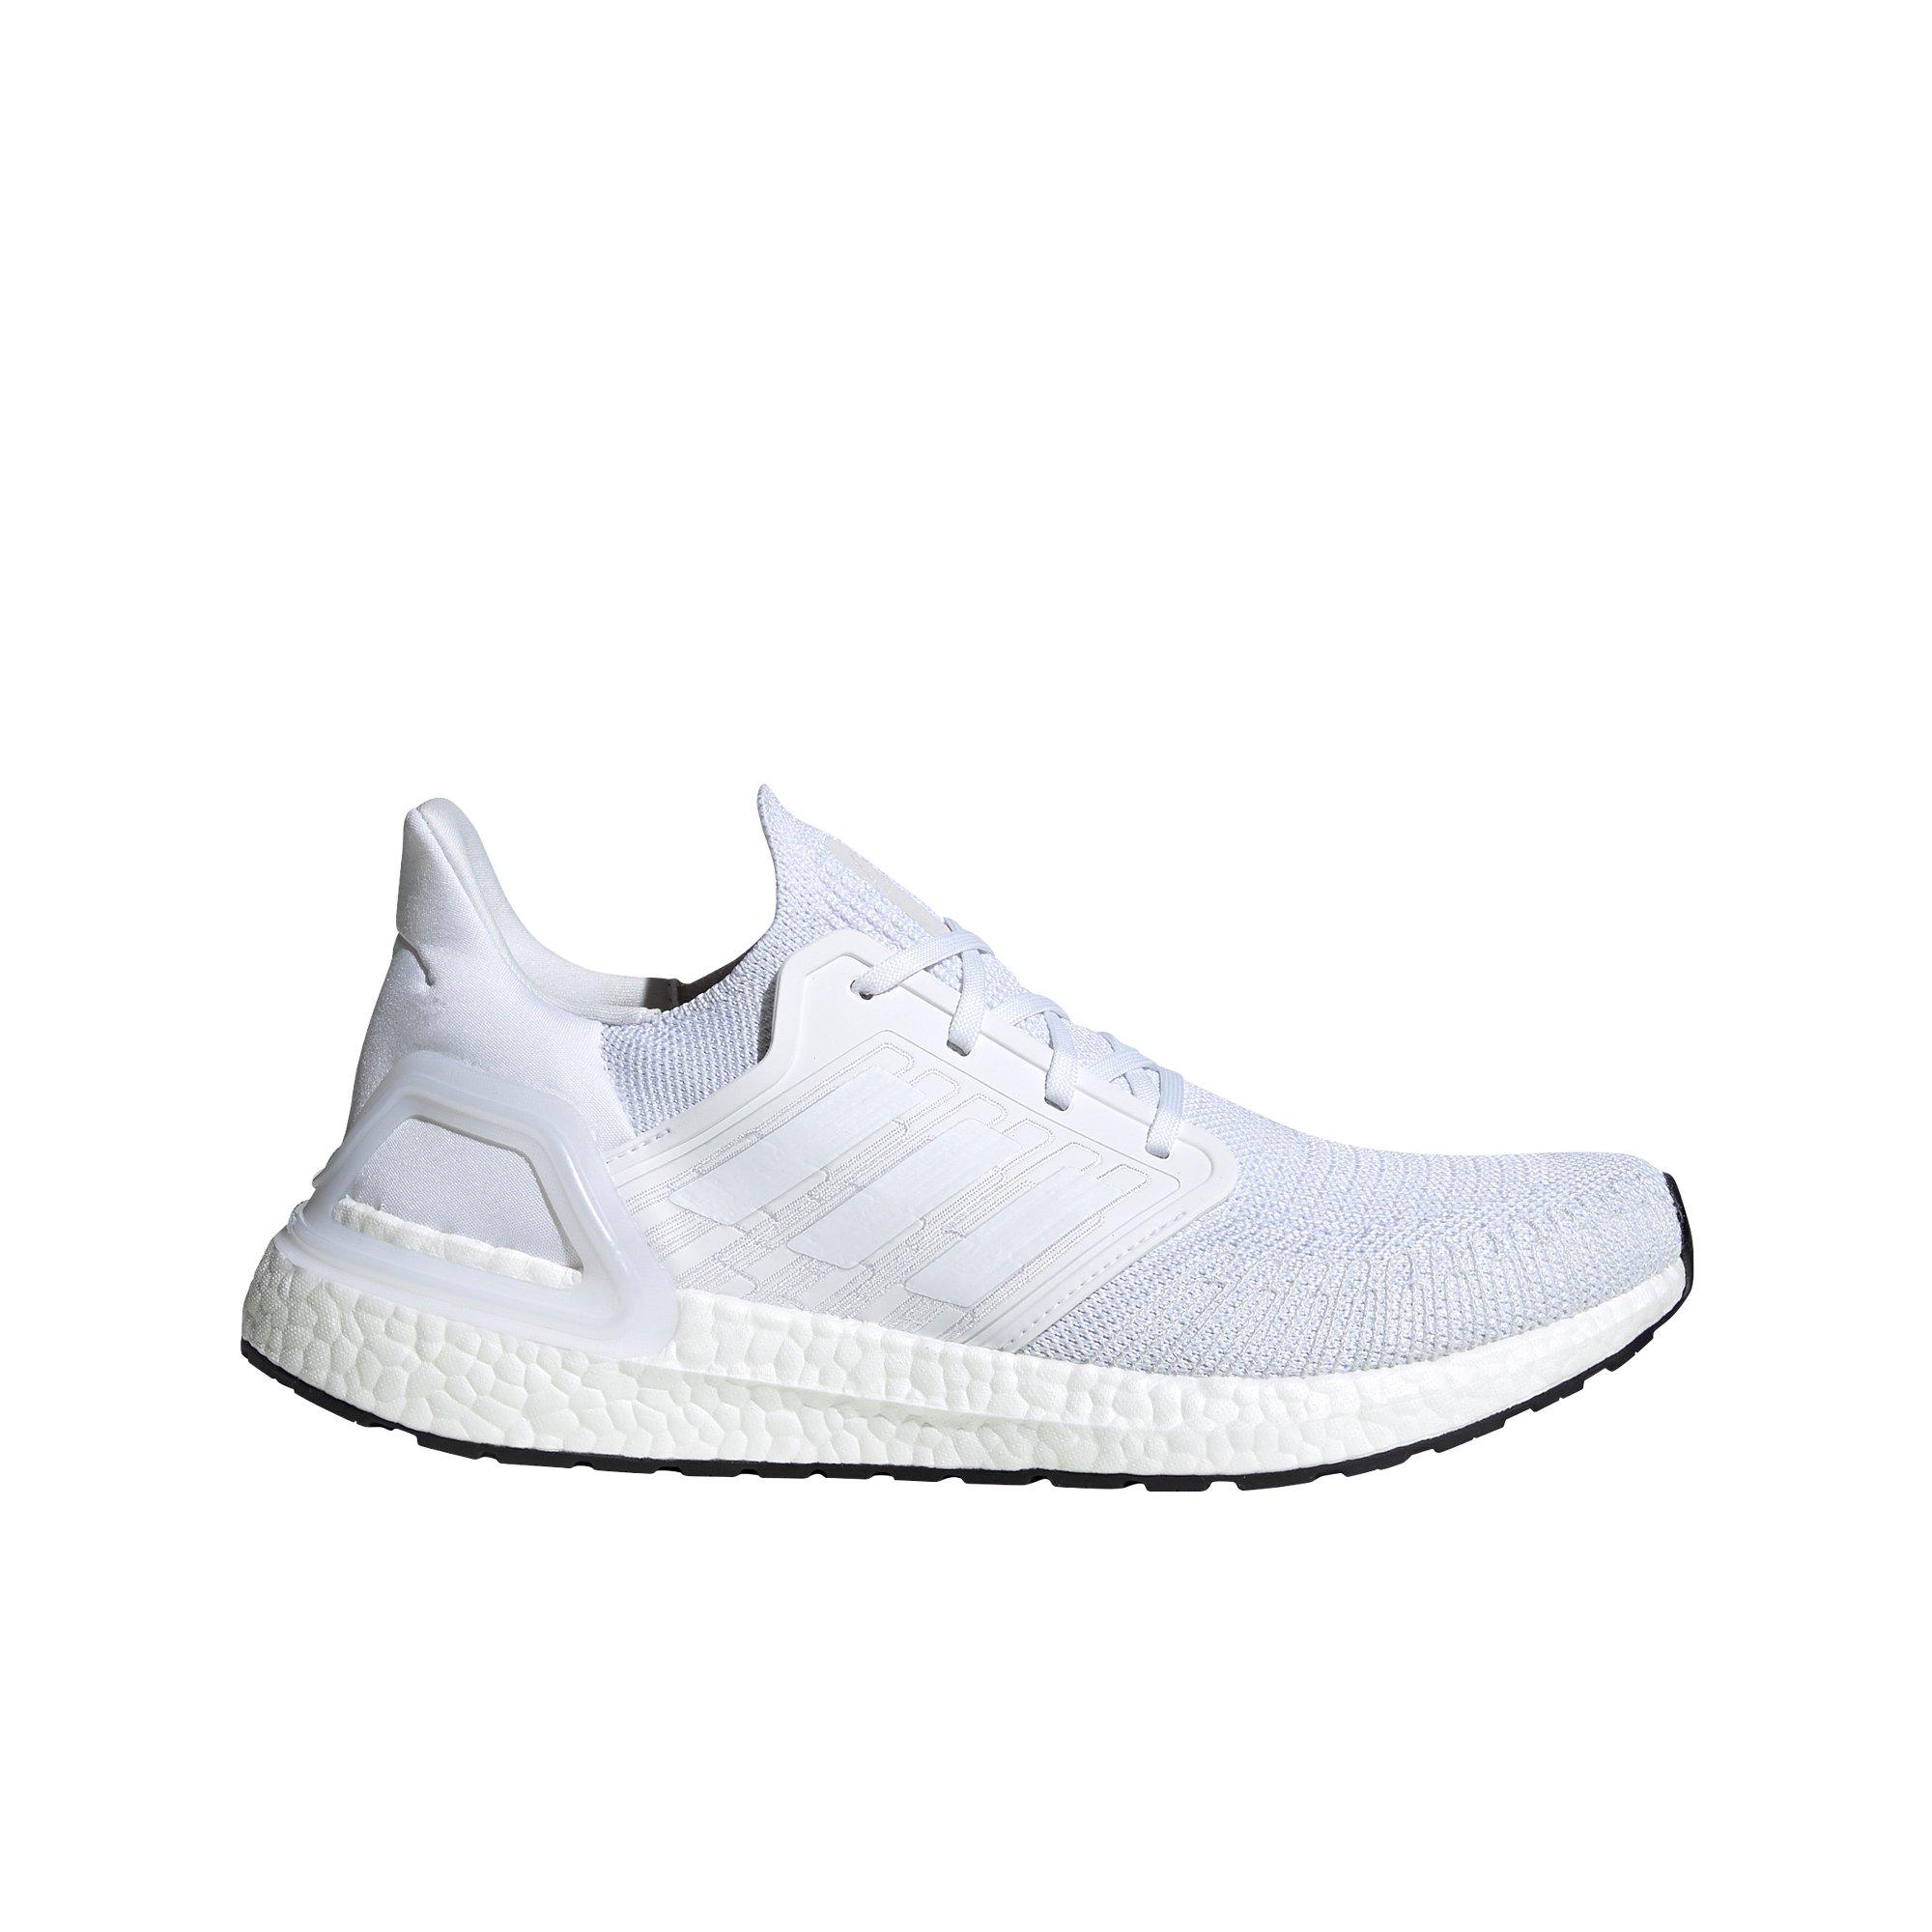 adidas running shoes all white